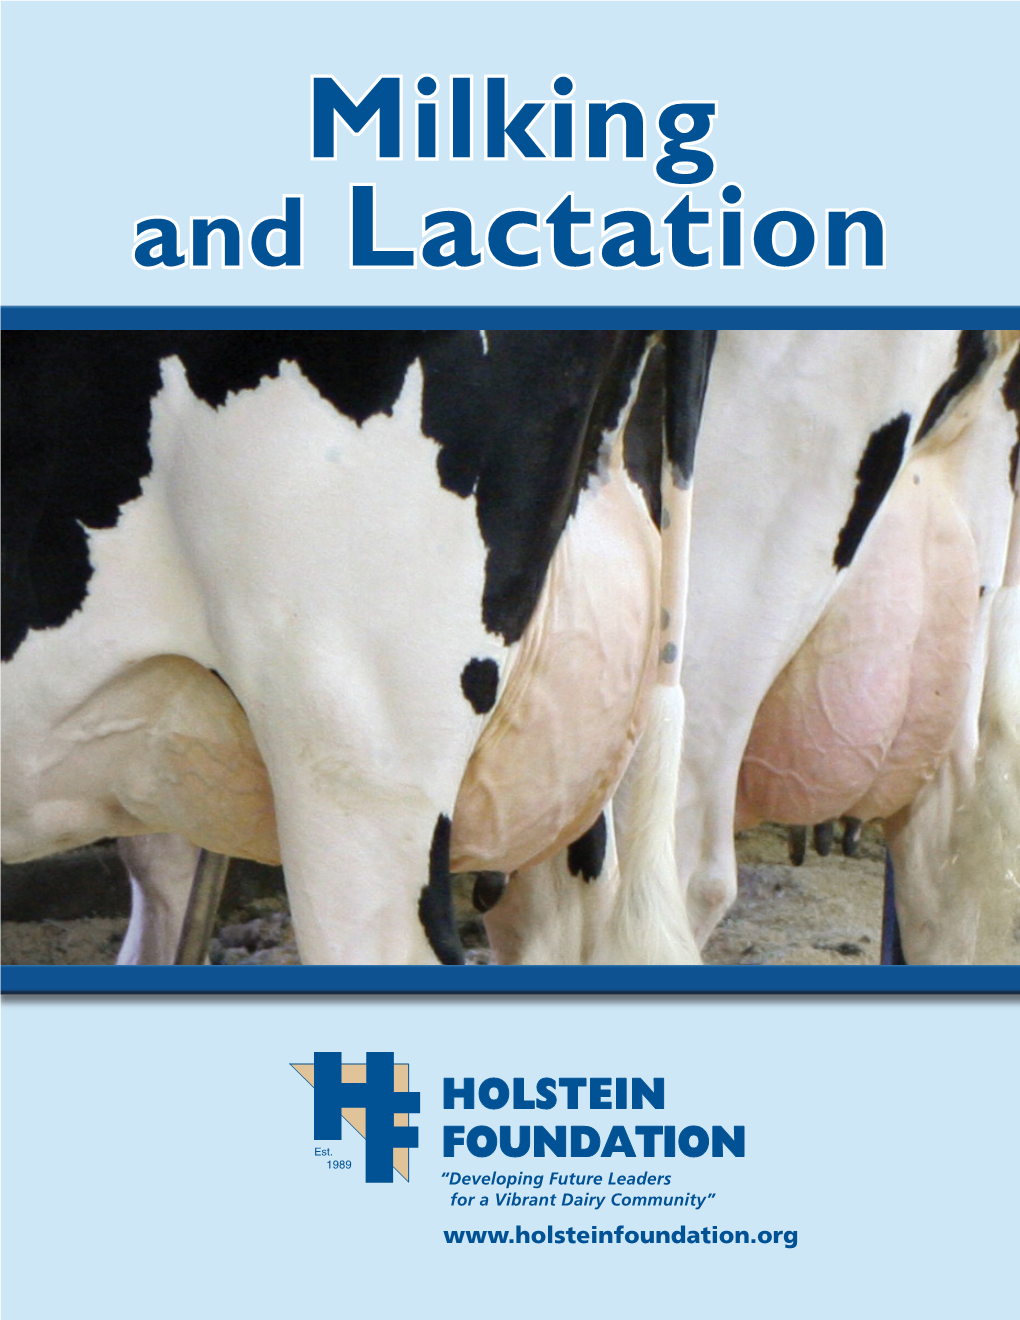 Milking and Lactation